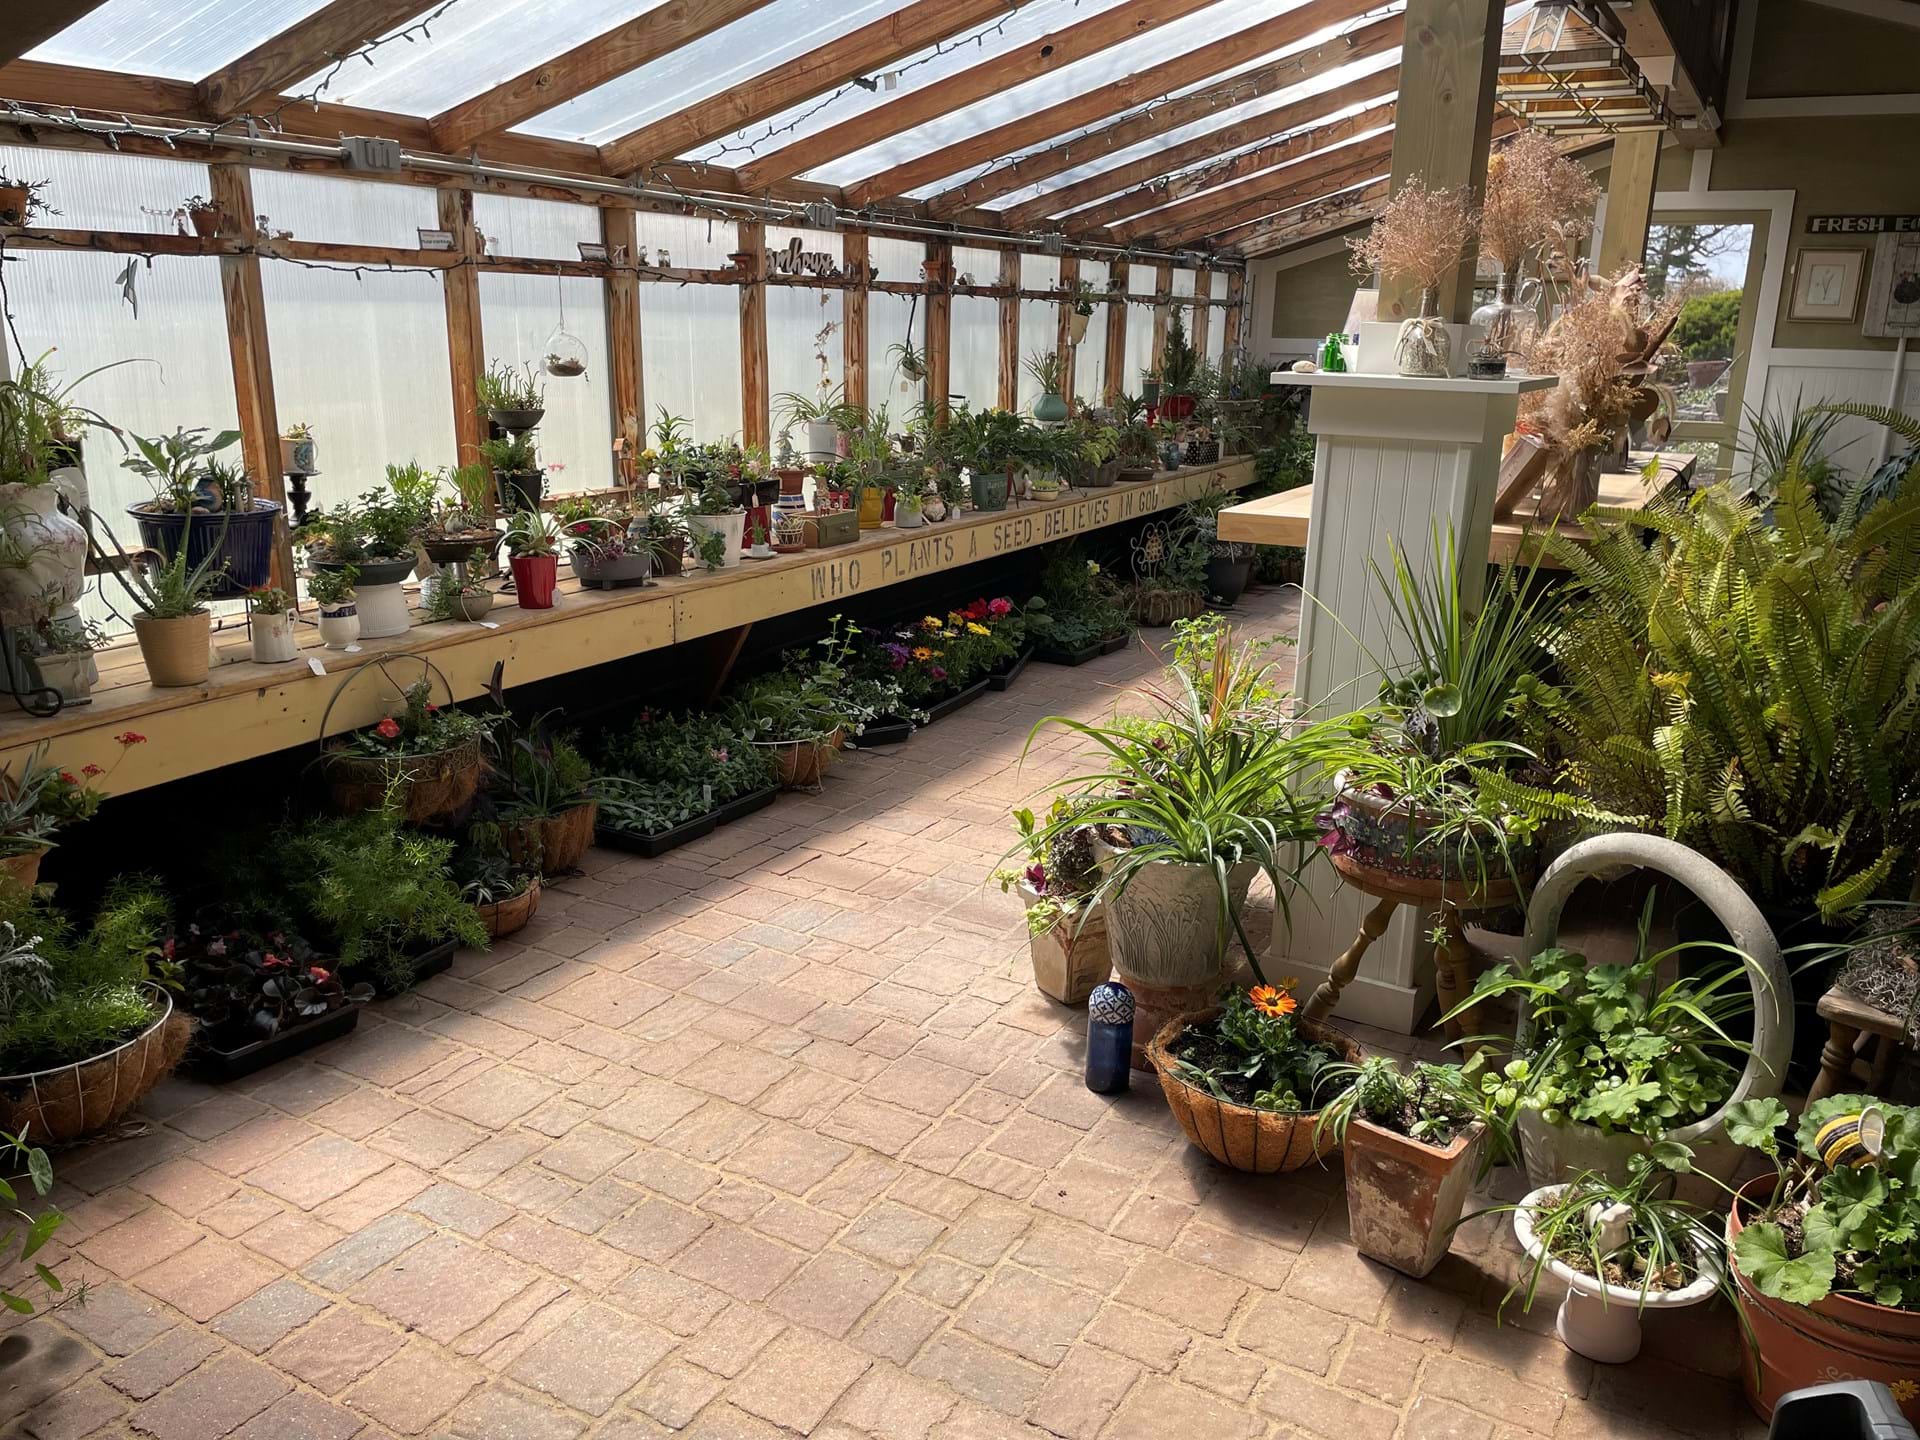 Shop our greenhouse for unique gifts